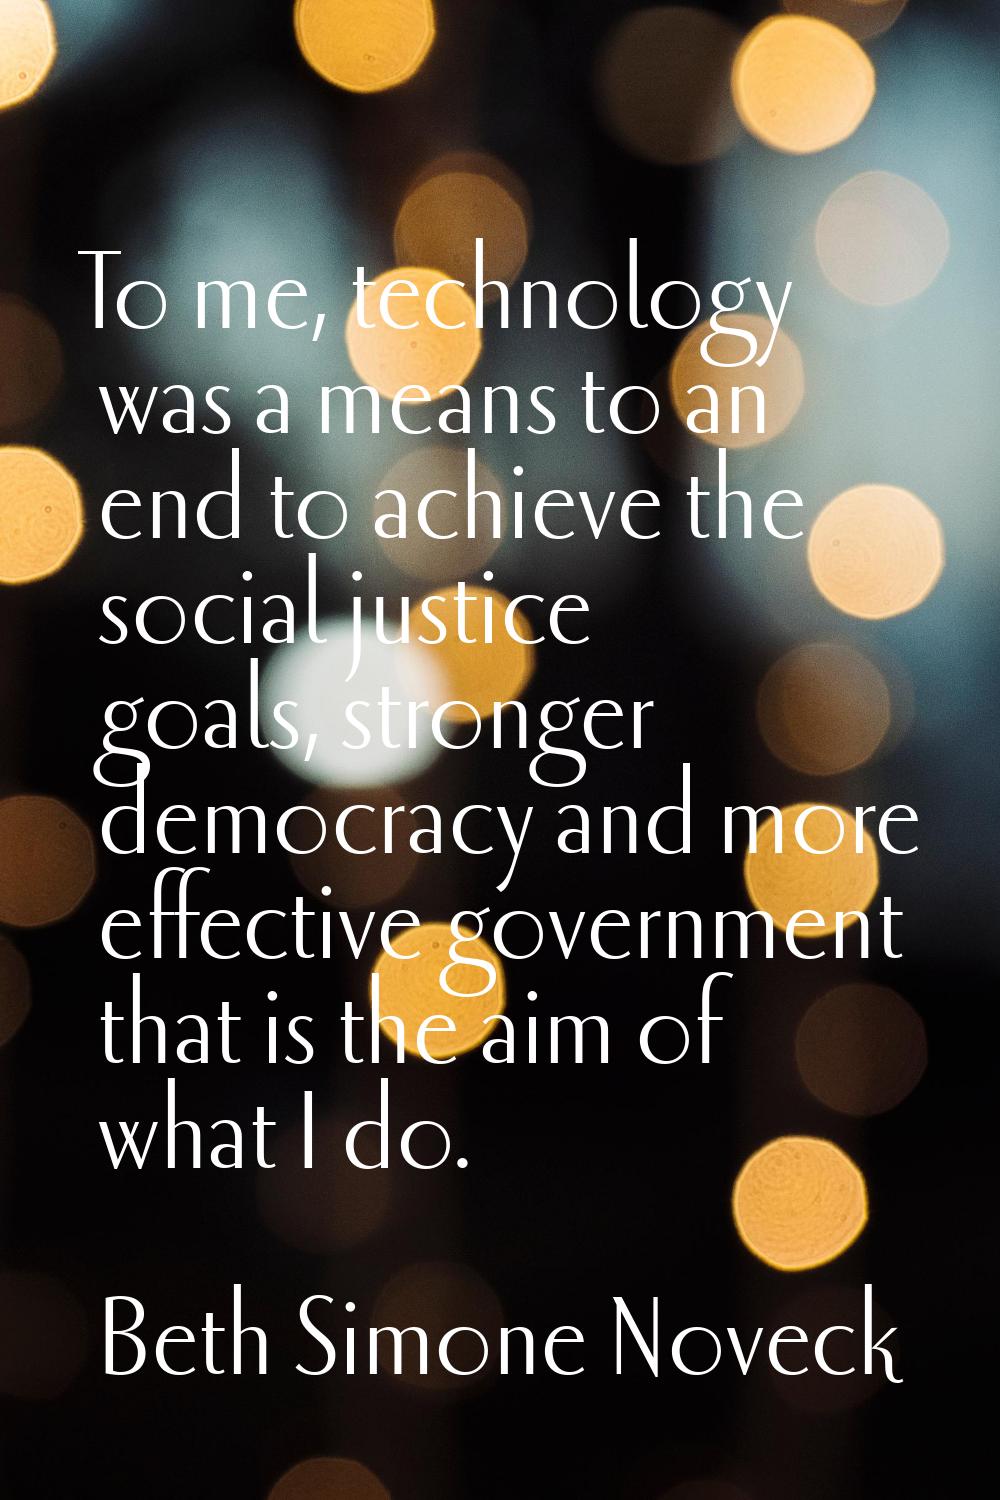 To me, technology was a means to an end to achieve the social justice goals, stronger democracy and